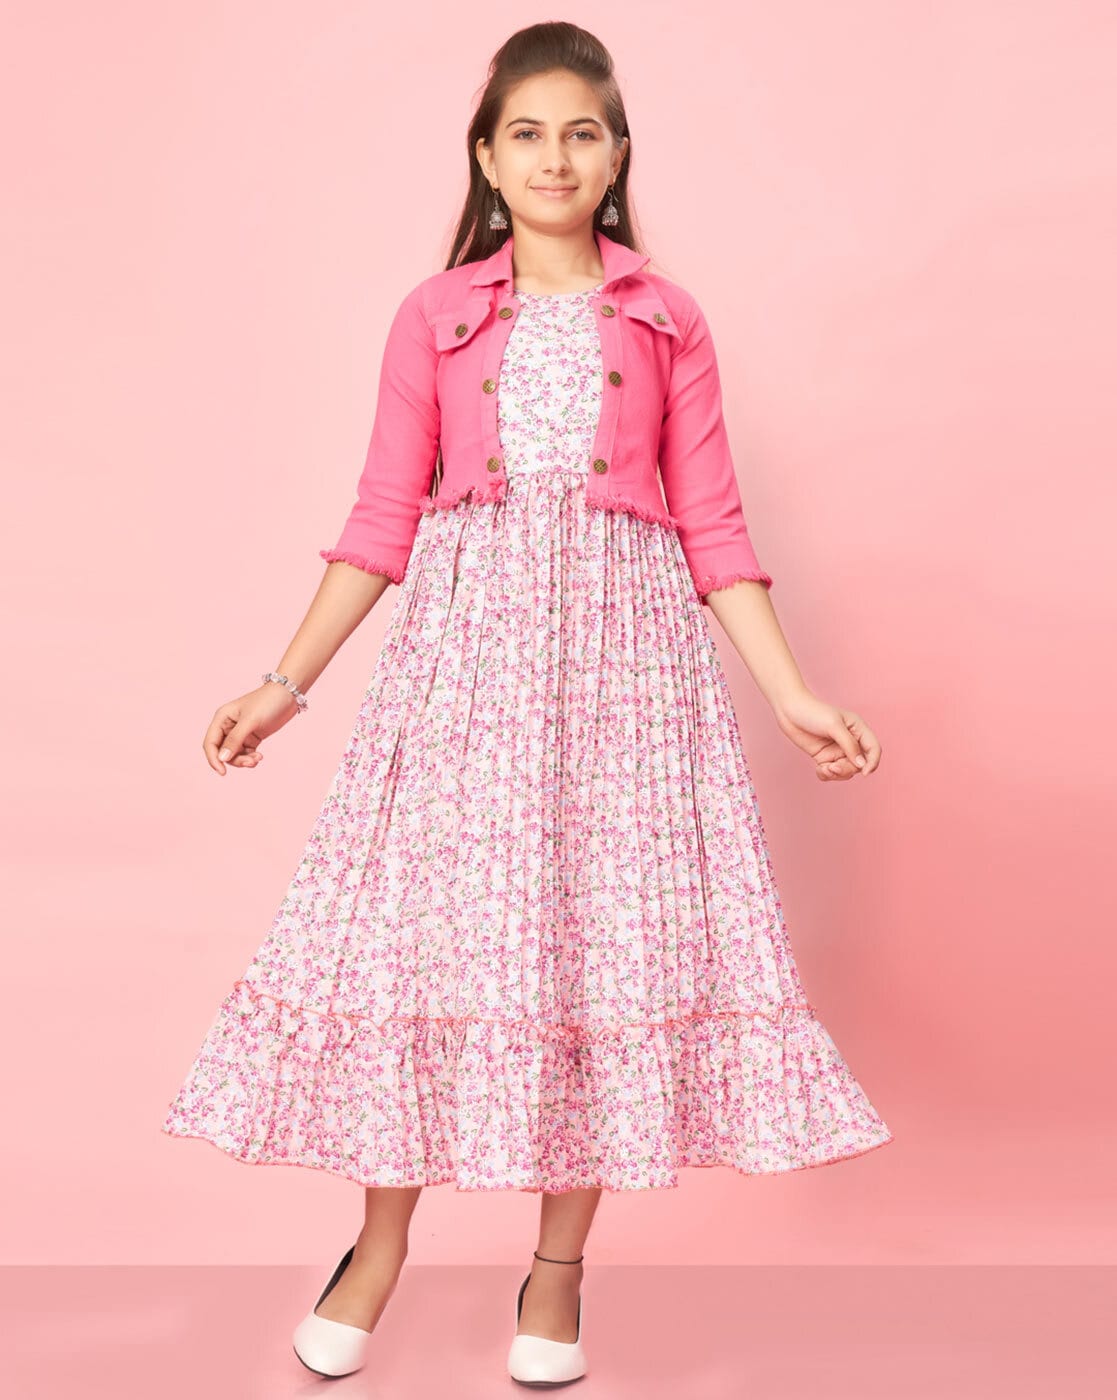 Girls Dresses & Clothing Australia | Girls Party & Formal Dresses - A  Little Lacey